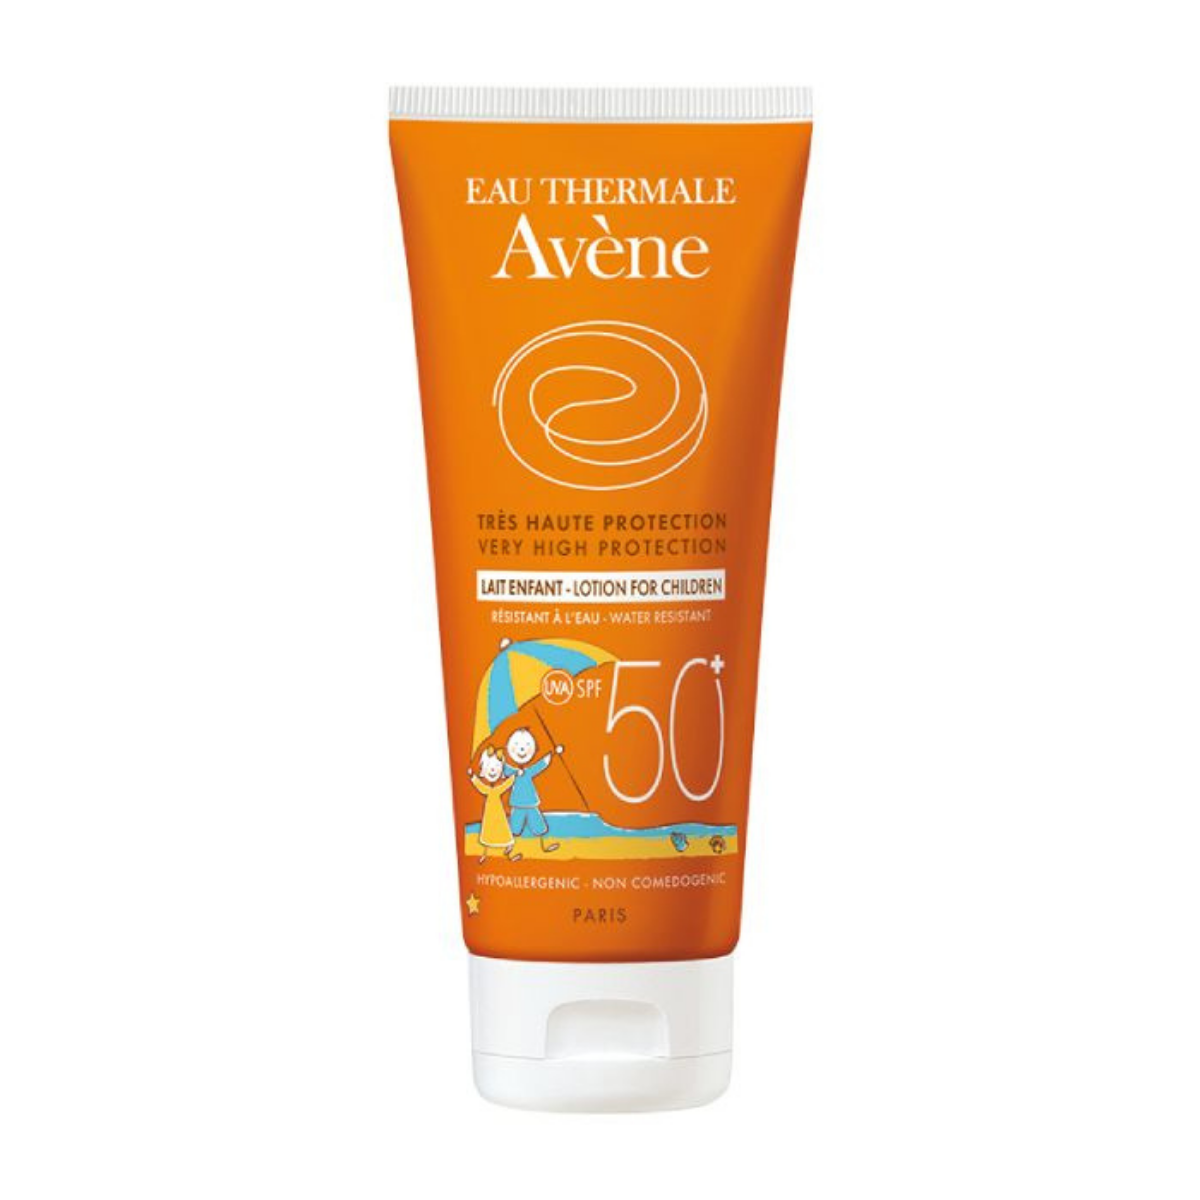 Avène Very High Protection Lotion for Children SPF50+